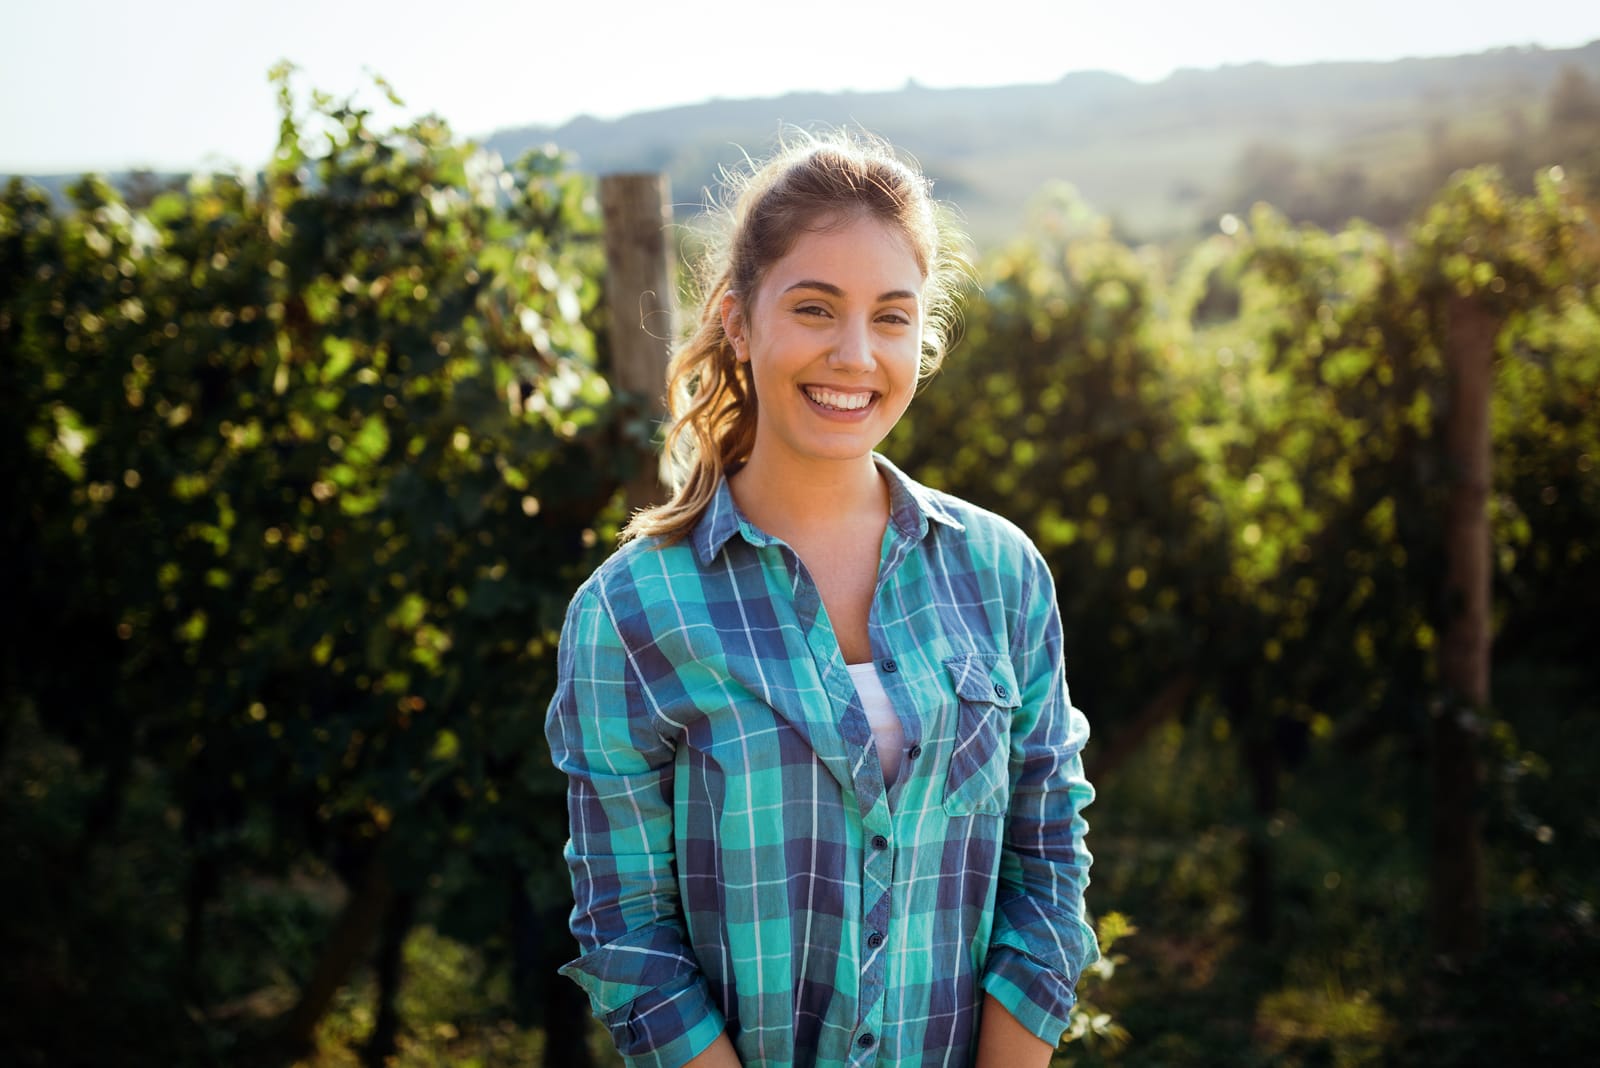 Woman winemaker with grapes in a vineyard